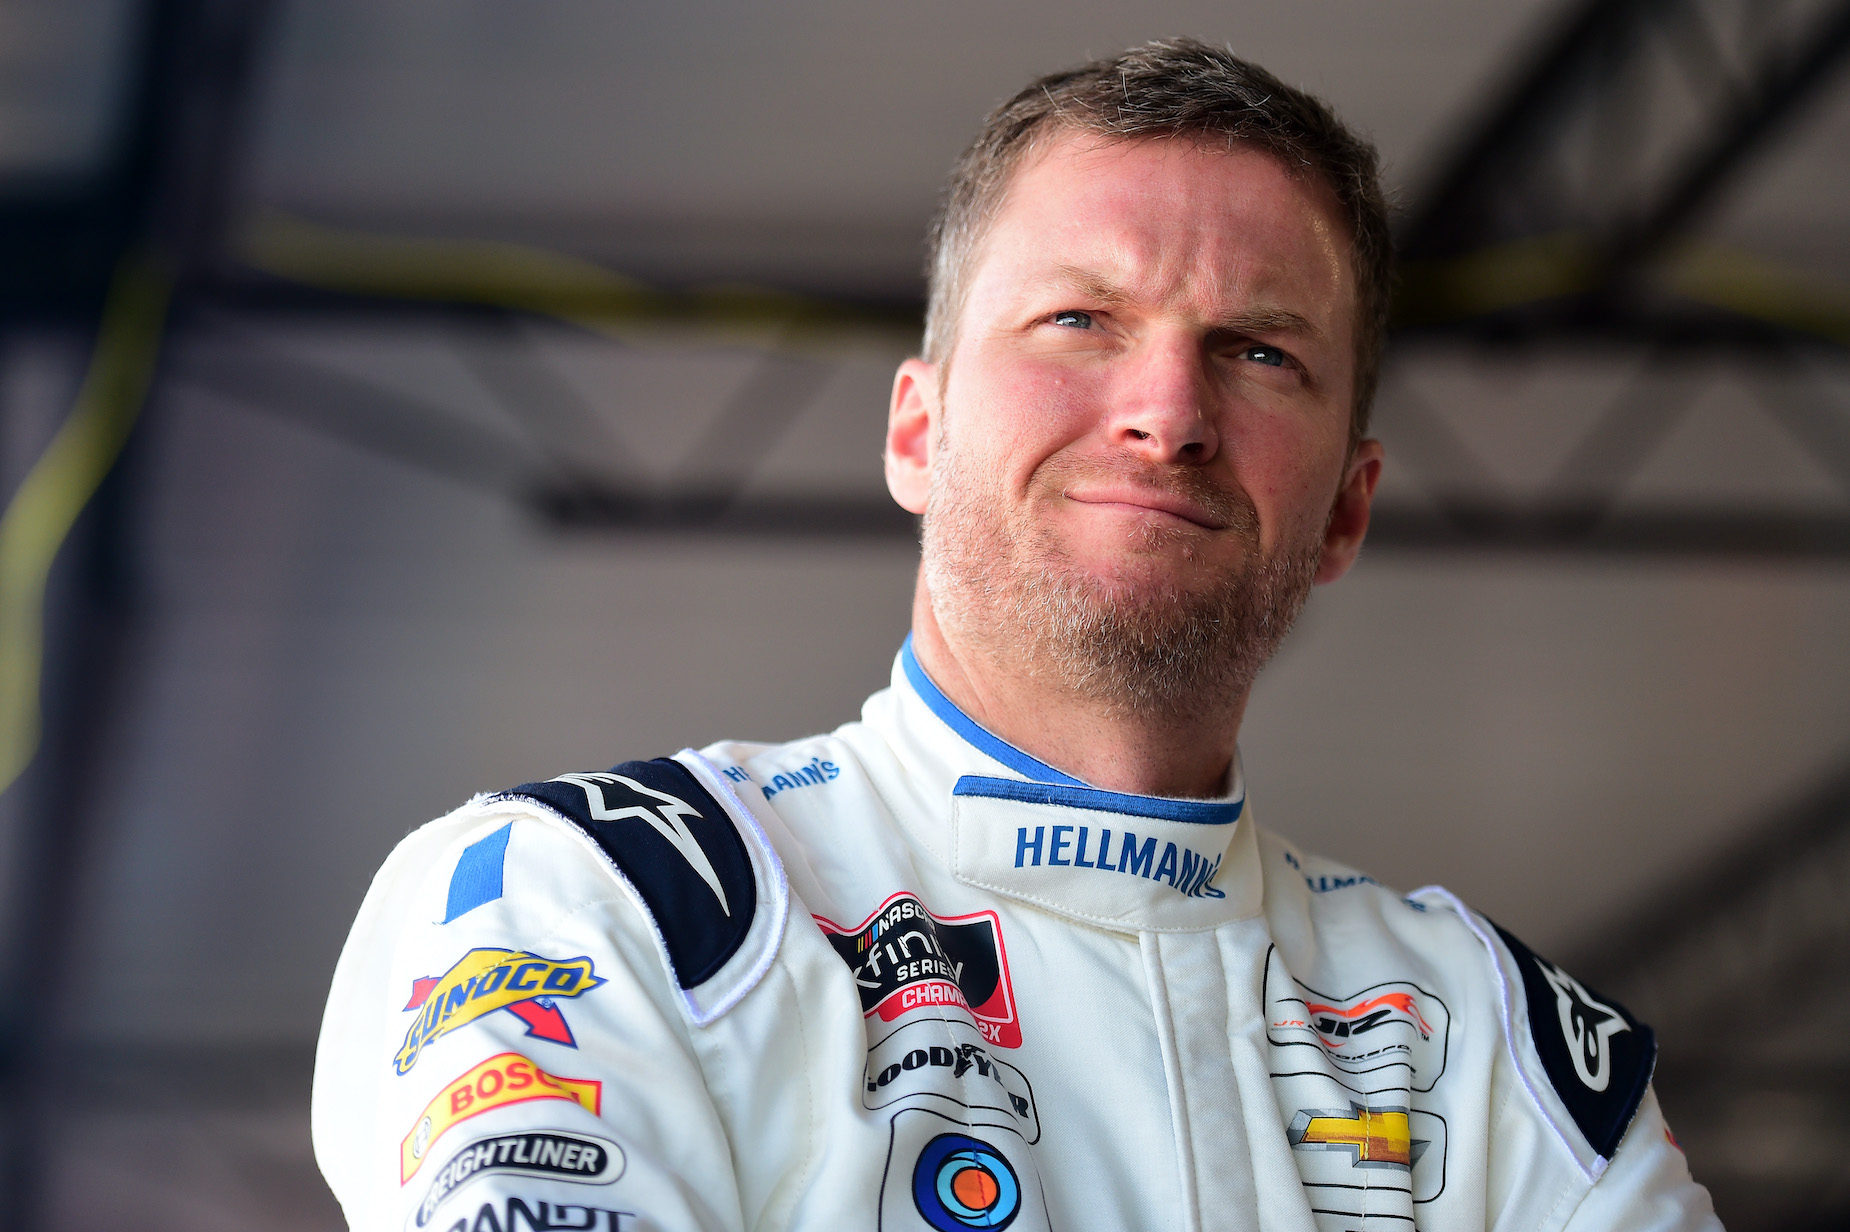 While Dale Earnhardt Jr. made his name in NASCAR, he's also pretty passionate about sandwiches.